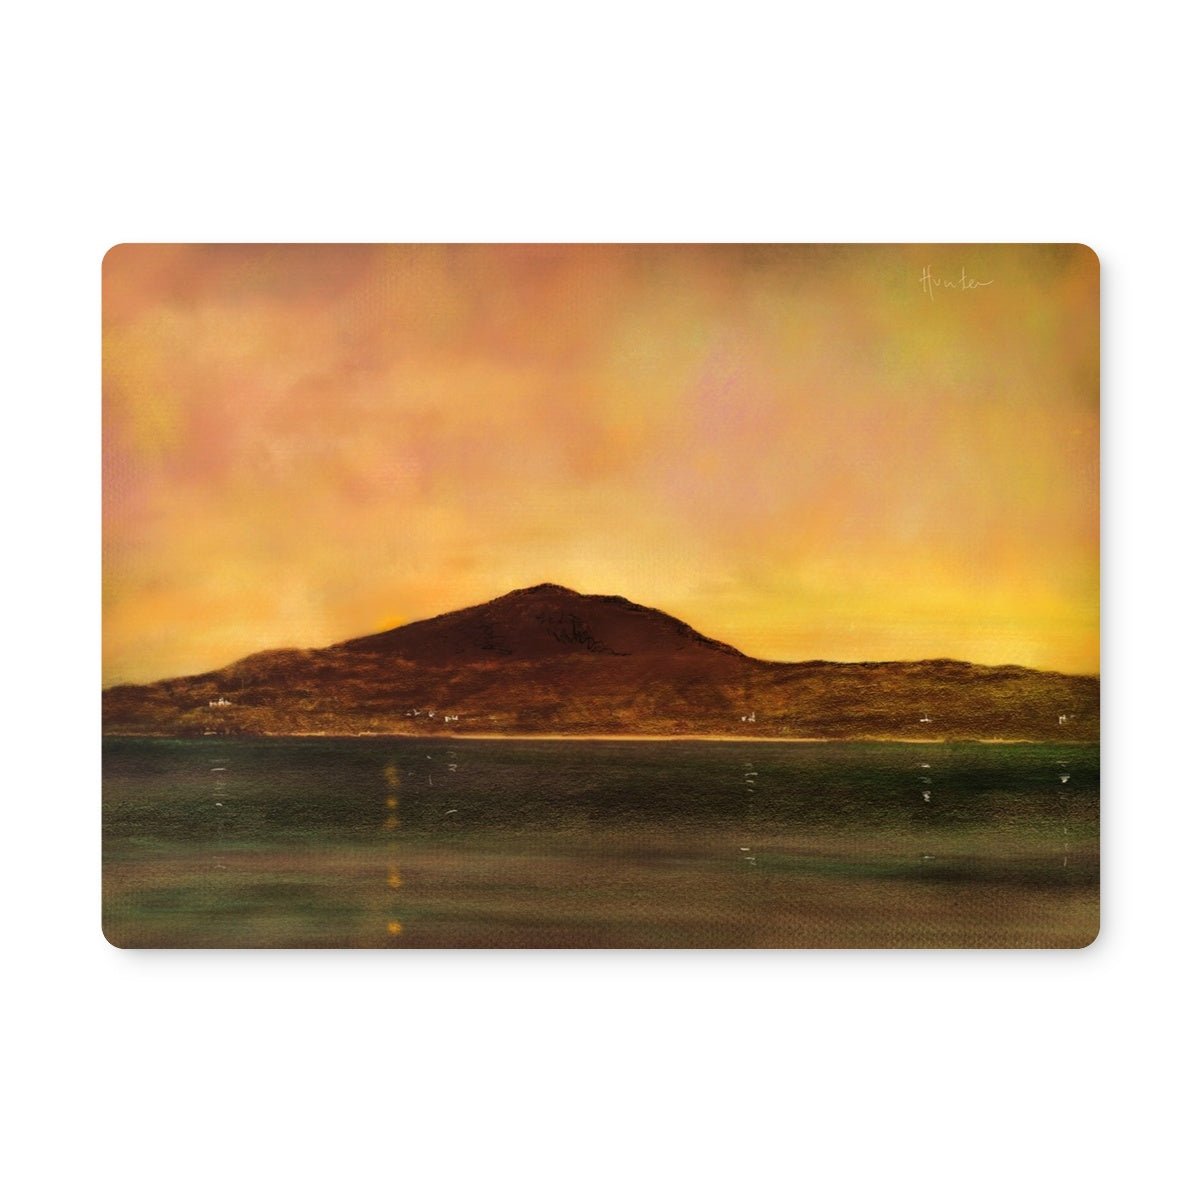 Eriskay Dusk Art Gifts Placemat-Placemats-Hebridean Islands Art Gallery-Single Placemat-Paintings, Prints, Homeware, Art Gifts From Scotland By Scottish Artist Kevin Hunter